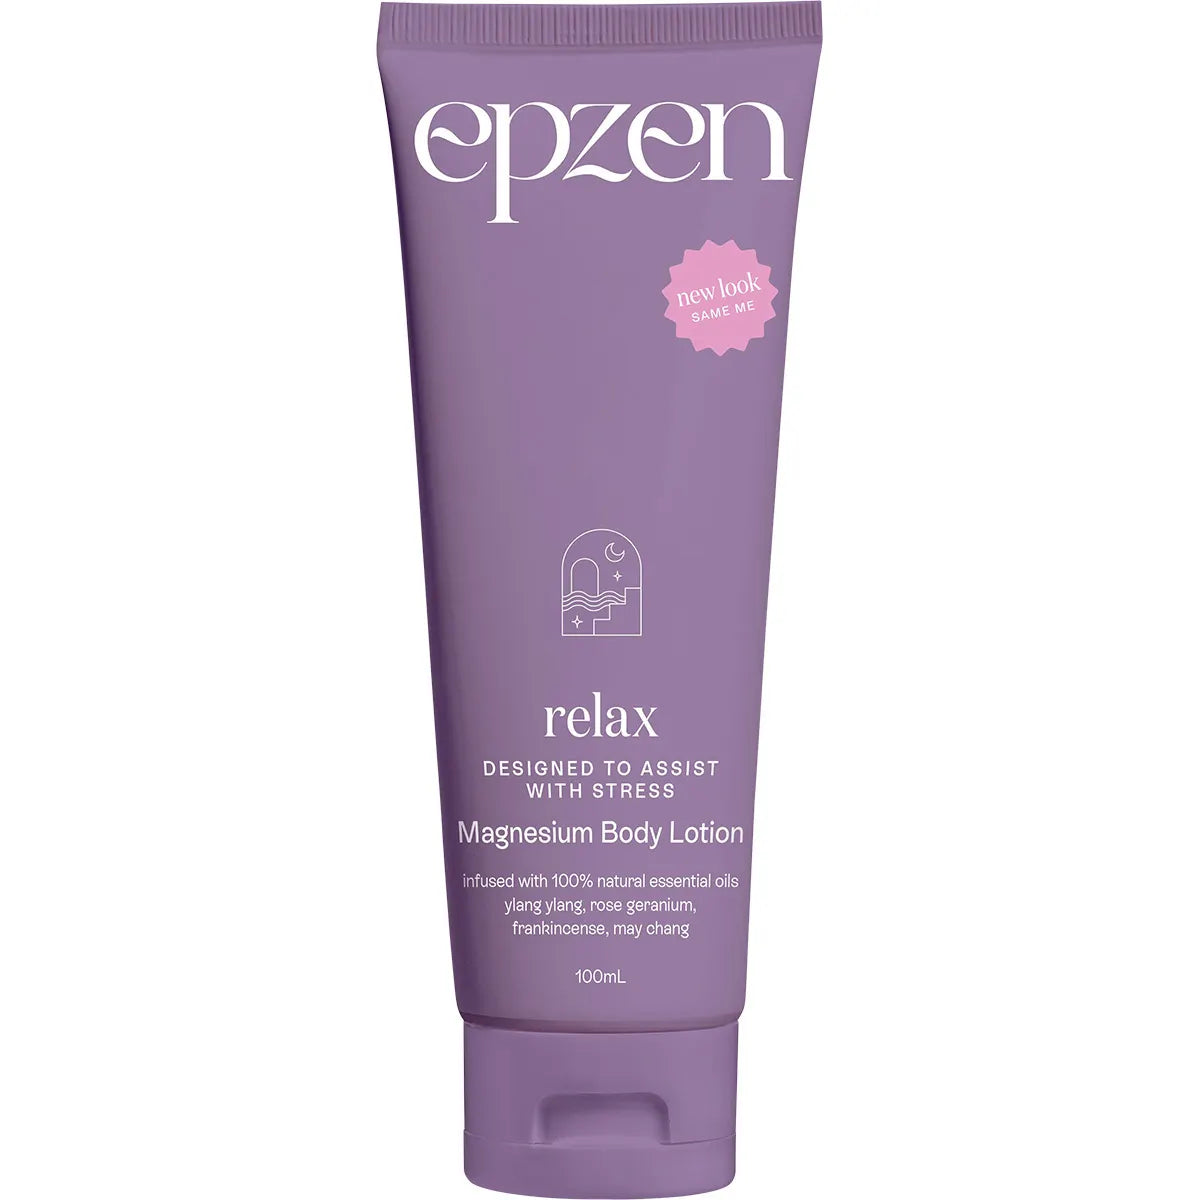 Relax magnesium body lotion